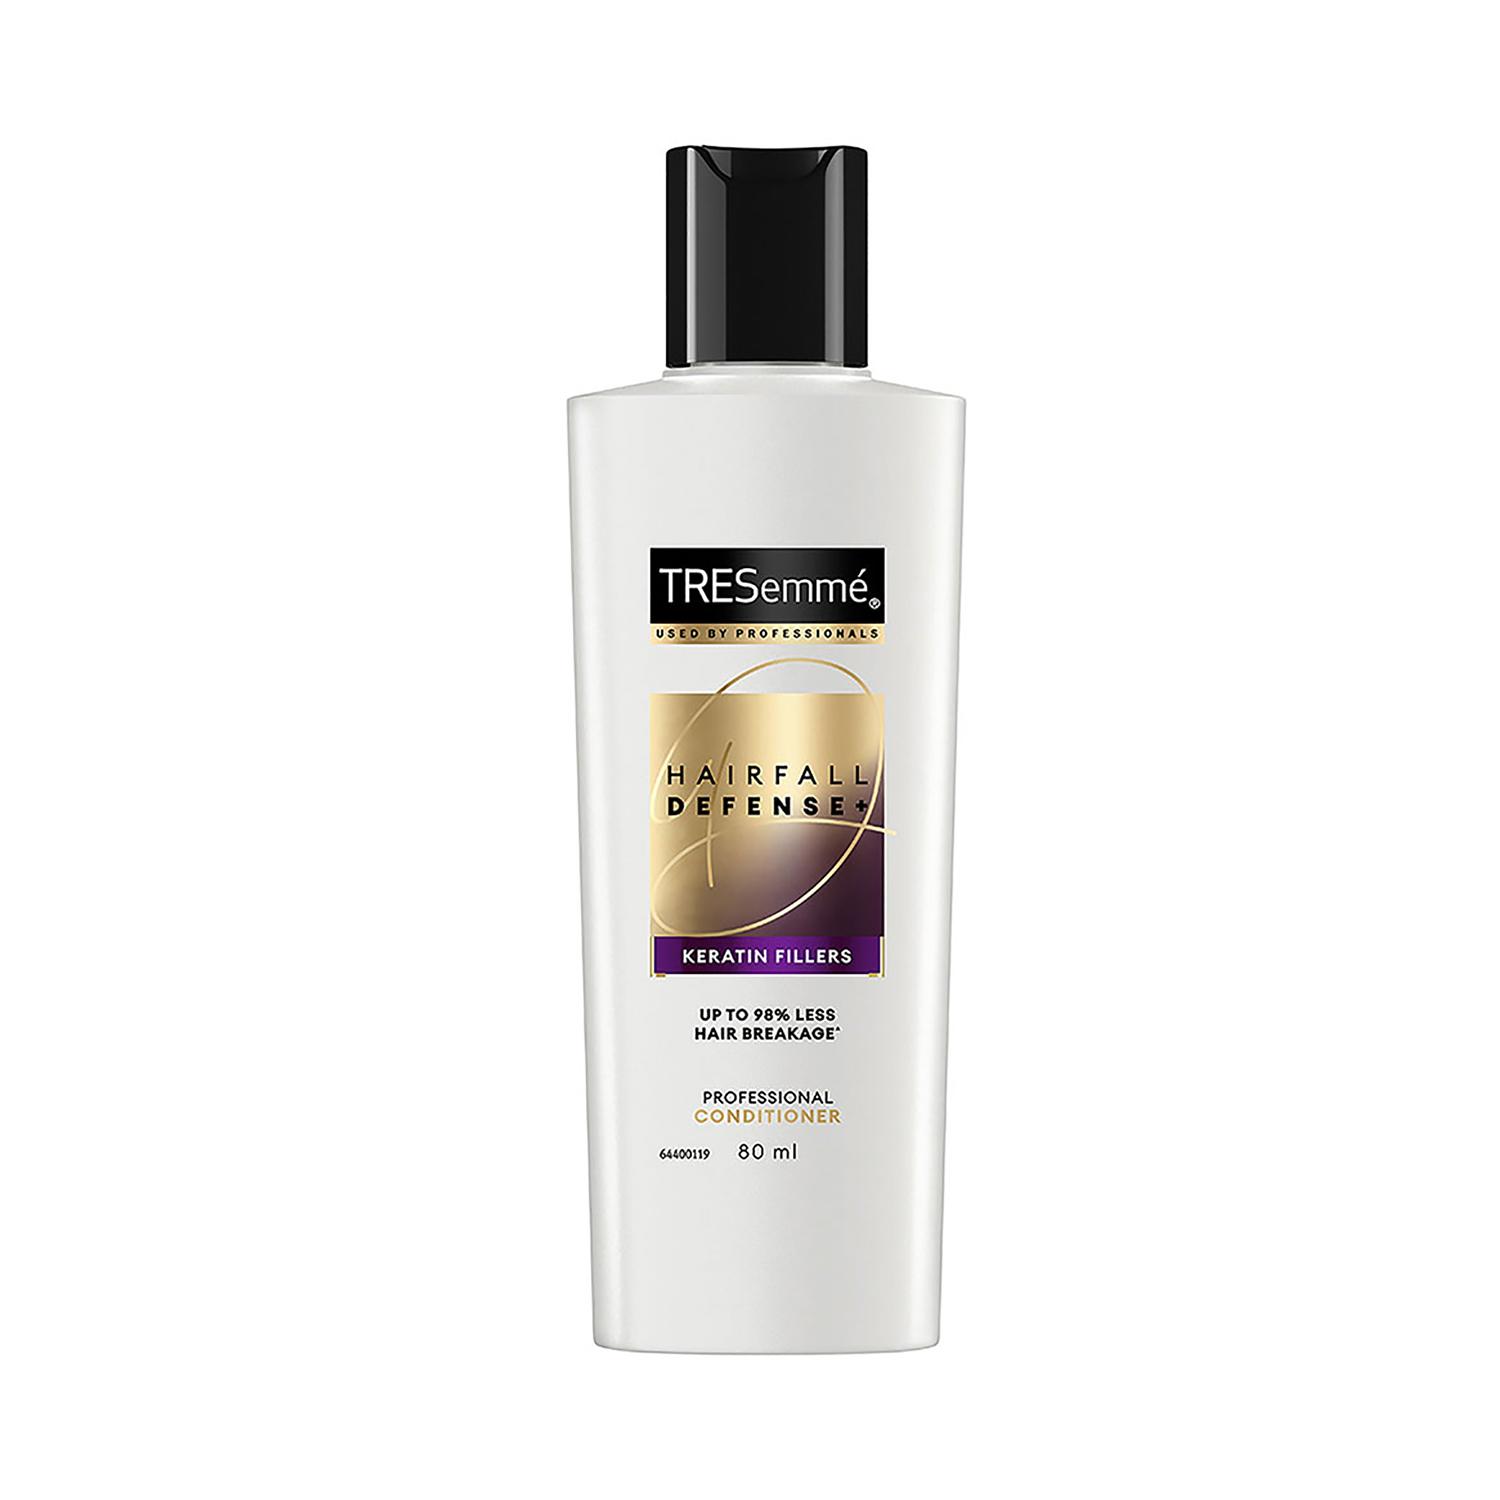 Tresemme | TRESemme Hairfall Defense+ Conditioner (80 ml)